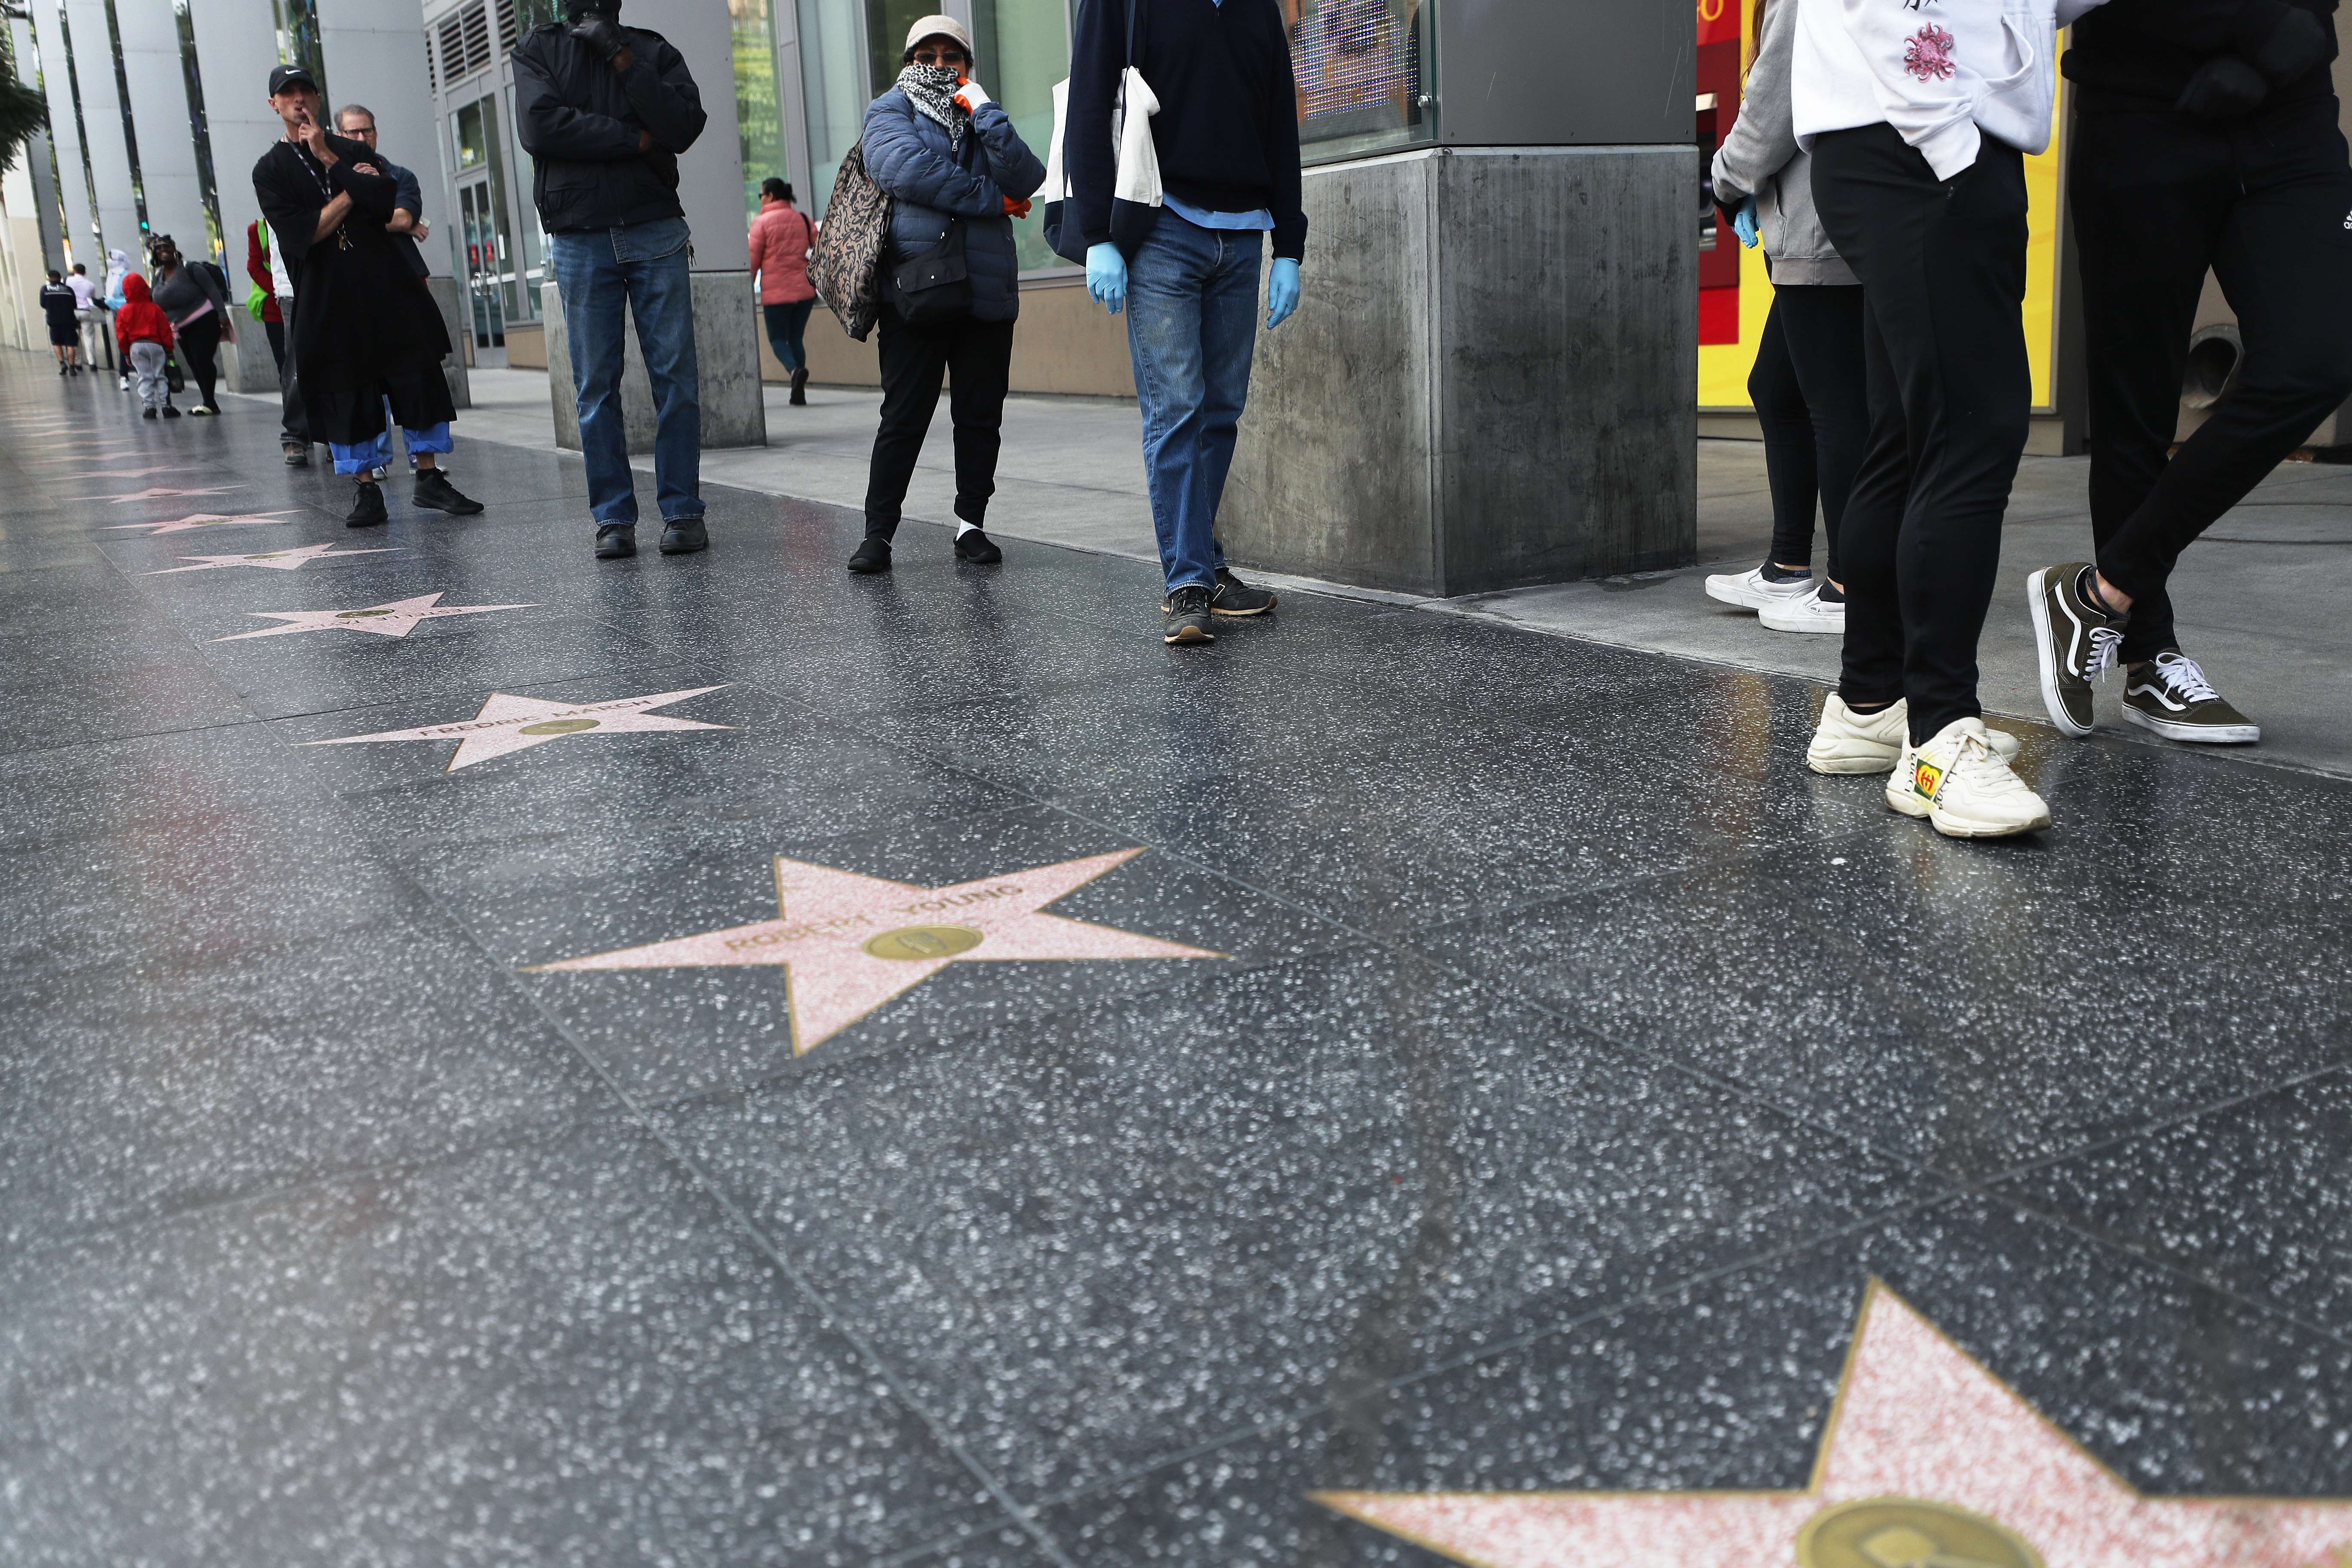 Customers maintain social distancing while standing in line Wednesday to enter a Trader Joe's supermarket along the Hollywood Walk of Fame, as the coronavirus pandemic expands in California. Photo: Getty Images via AFP